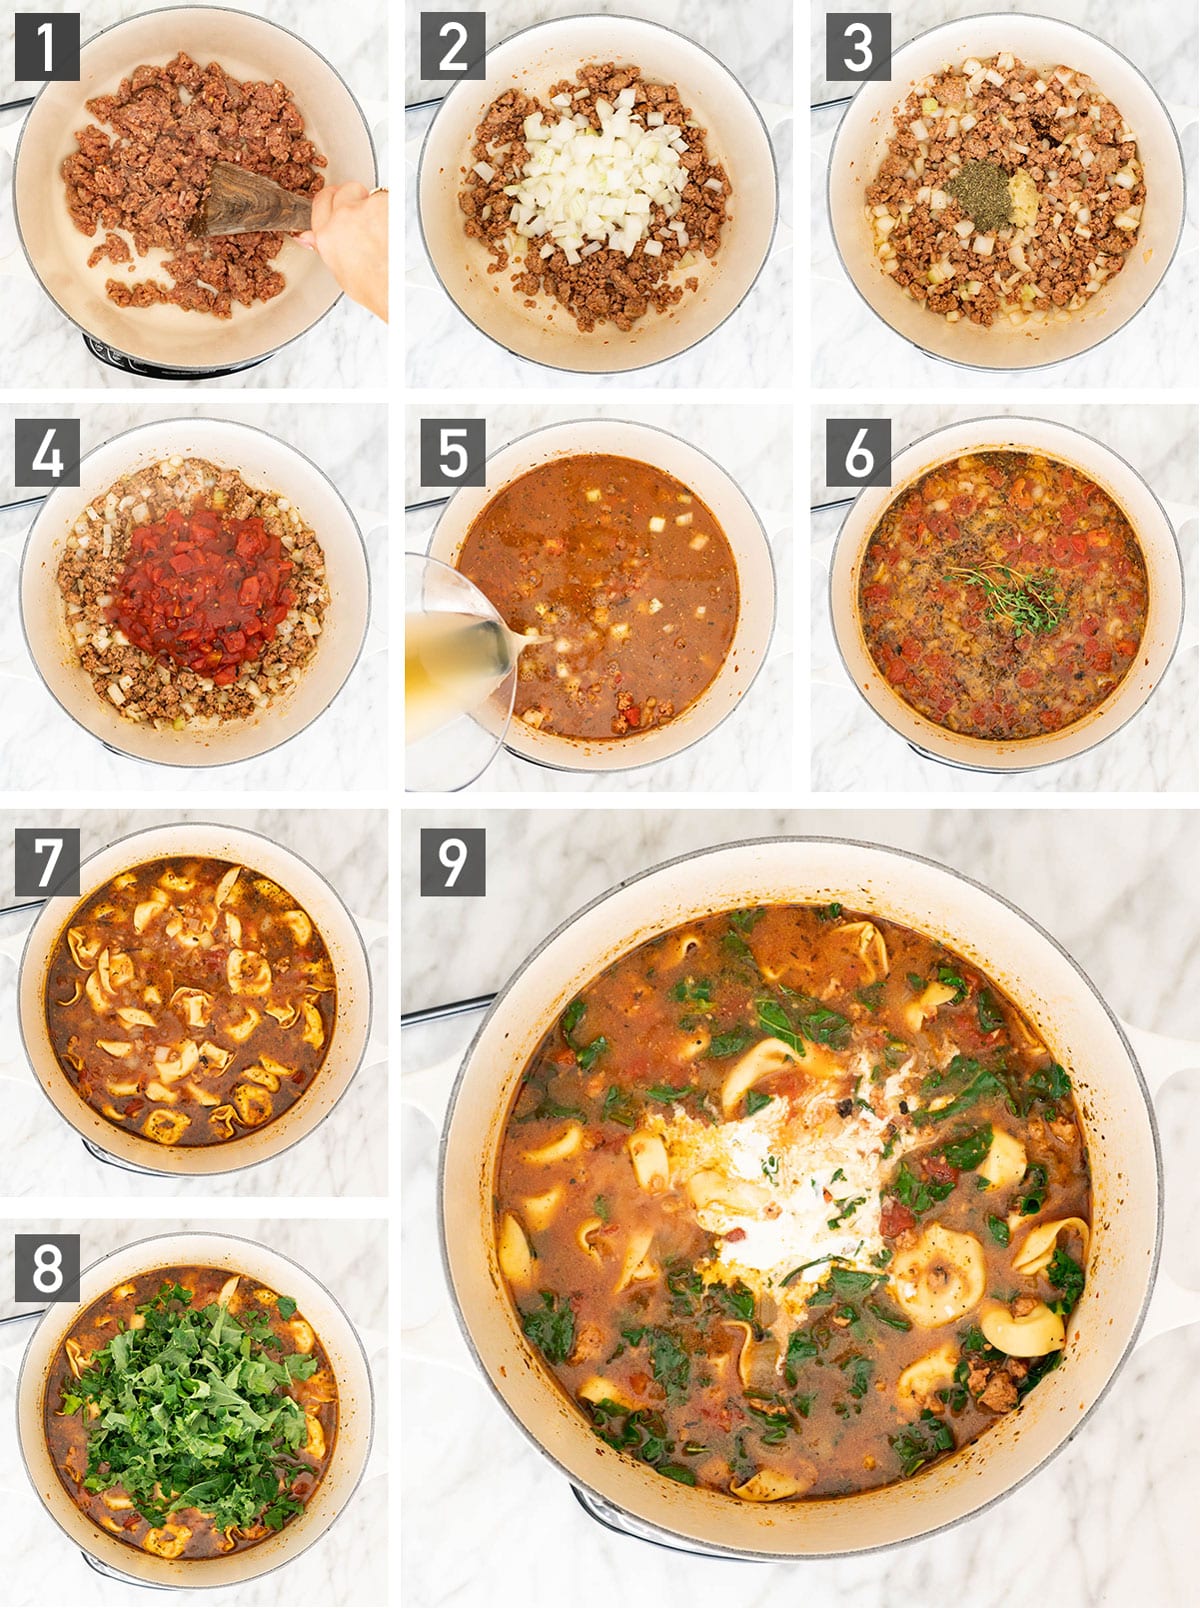 Step-by-step instructions for making creamy tortellini soup with sausage